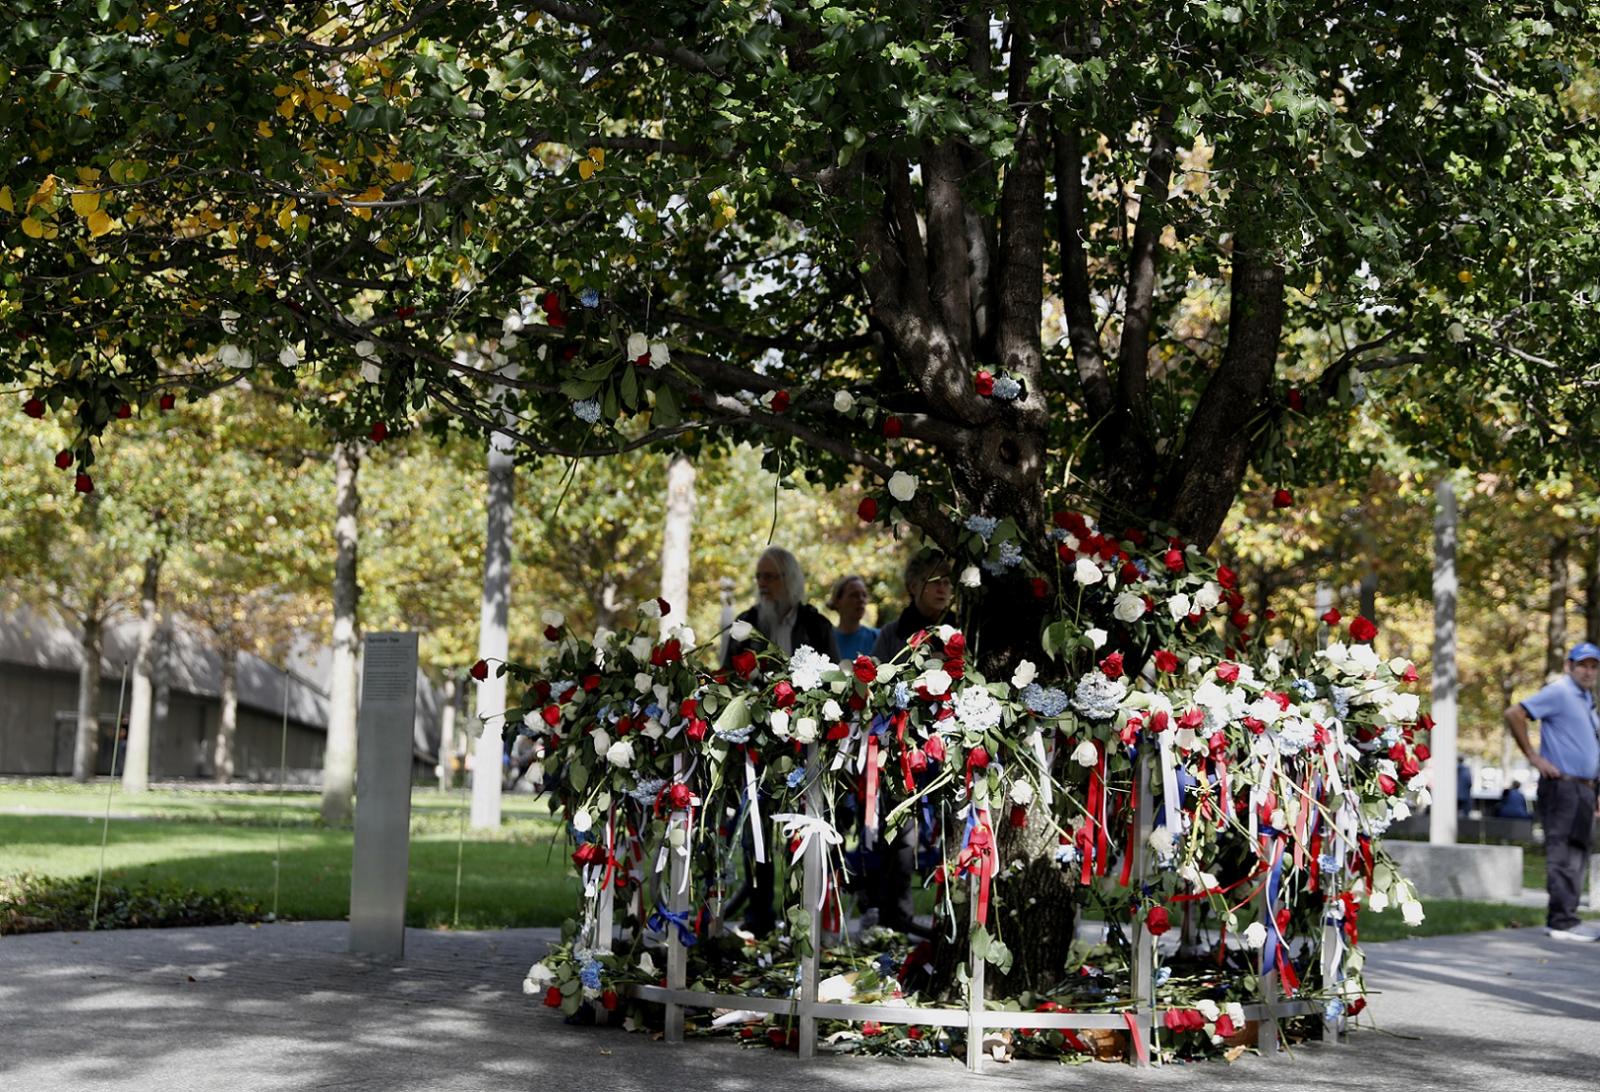 A Callery pear tree known as the Survivor Tree is adorned with red, white, and blue ribbons and flowers on a fall day.